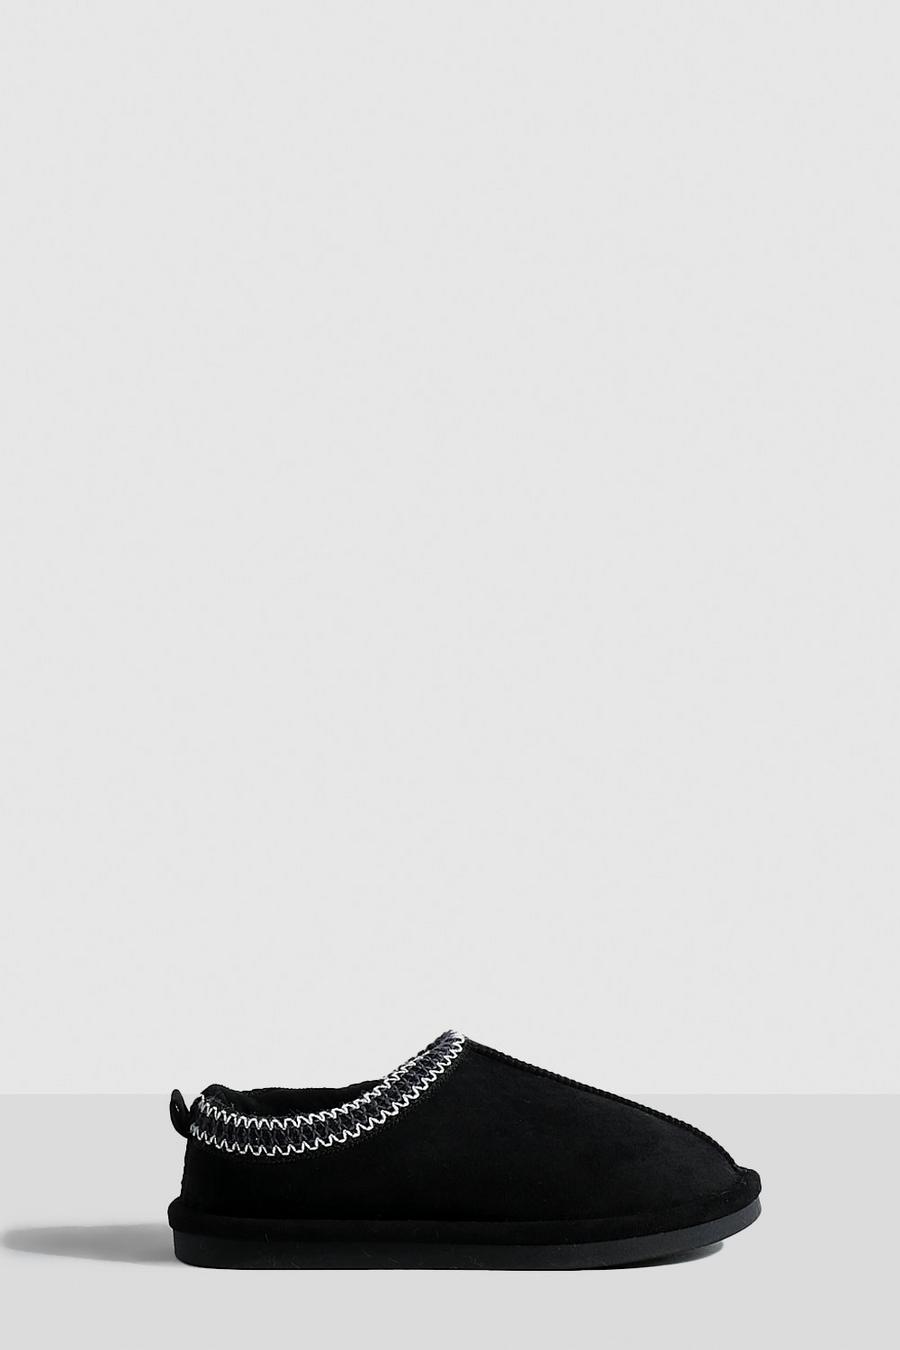 Black Embroidered Slip On Cosy Mules